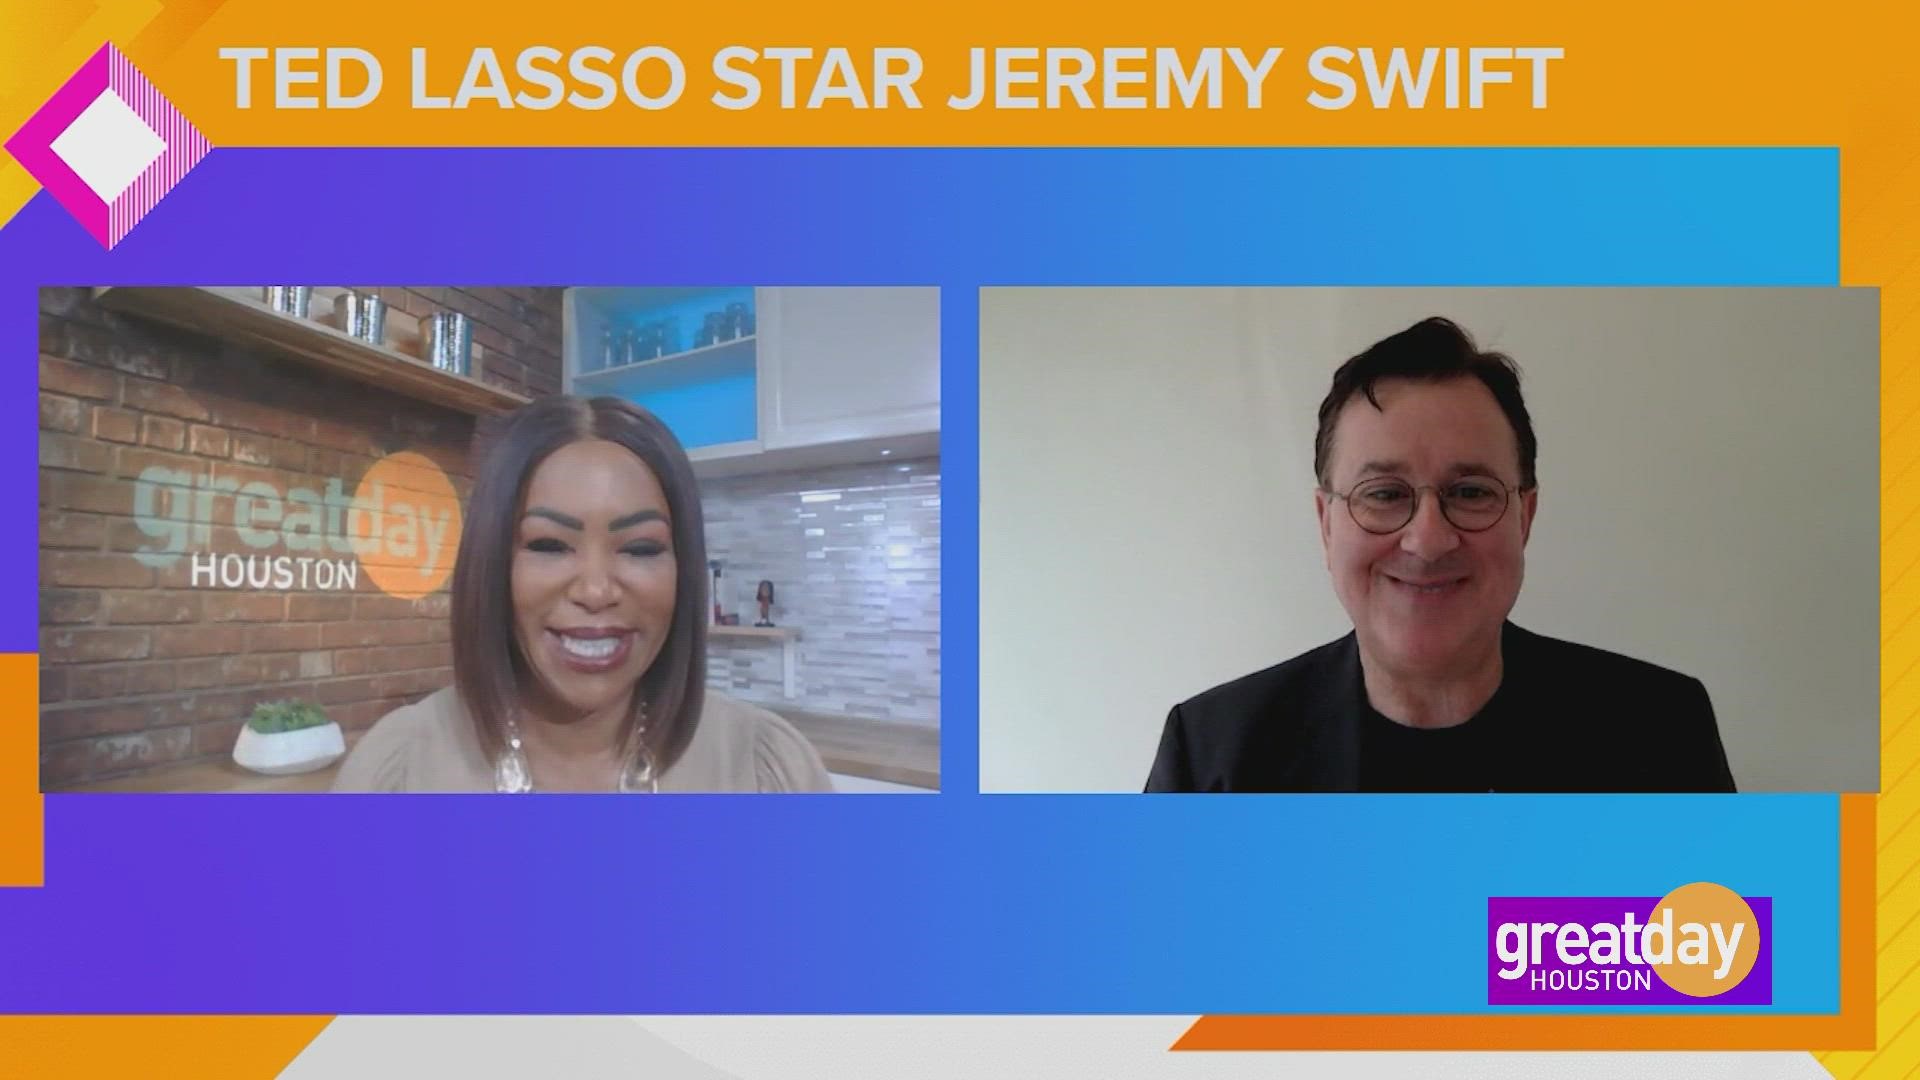 Actor Jeremy Swift talks about the new season of "Ted Lasso" and why the creative arts are so important.